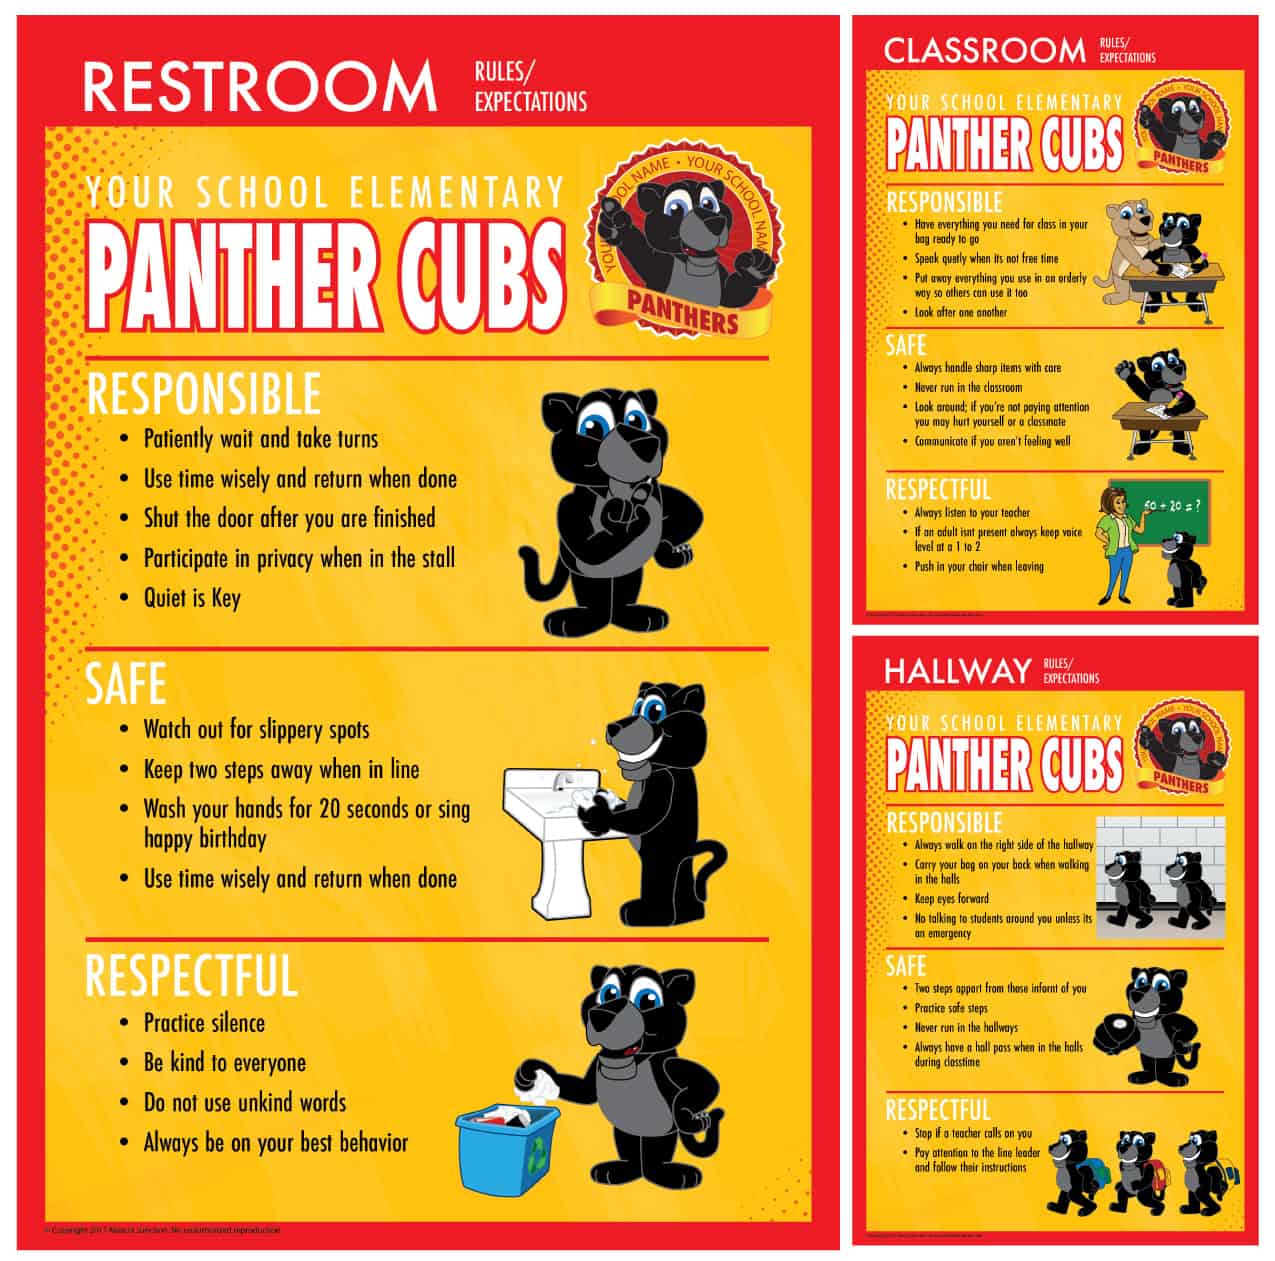 Rules-posters_Panther-cub